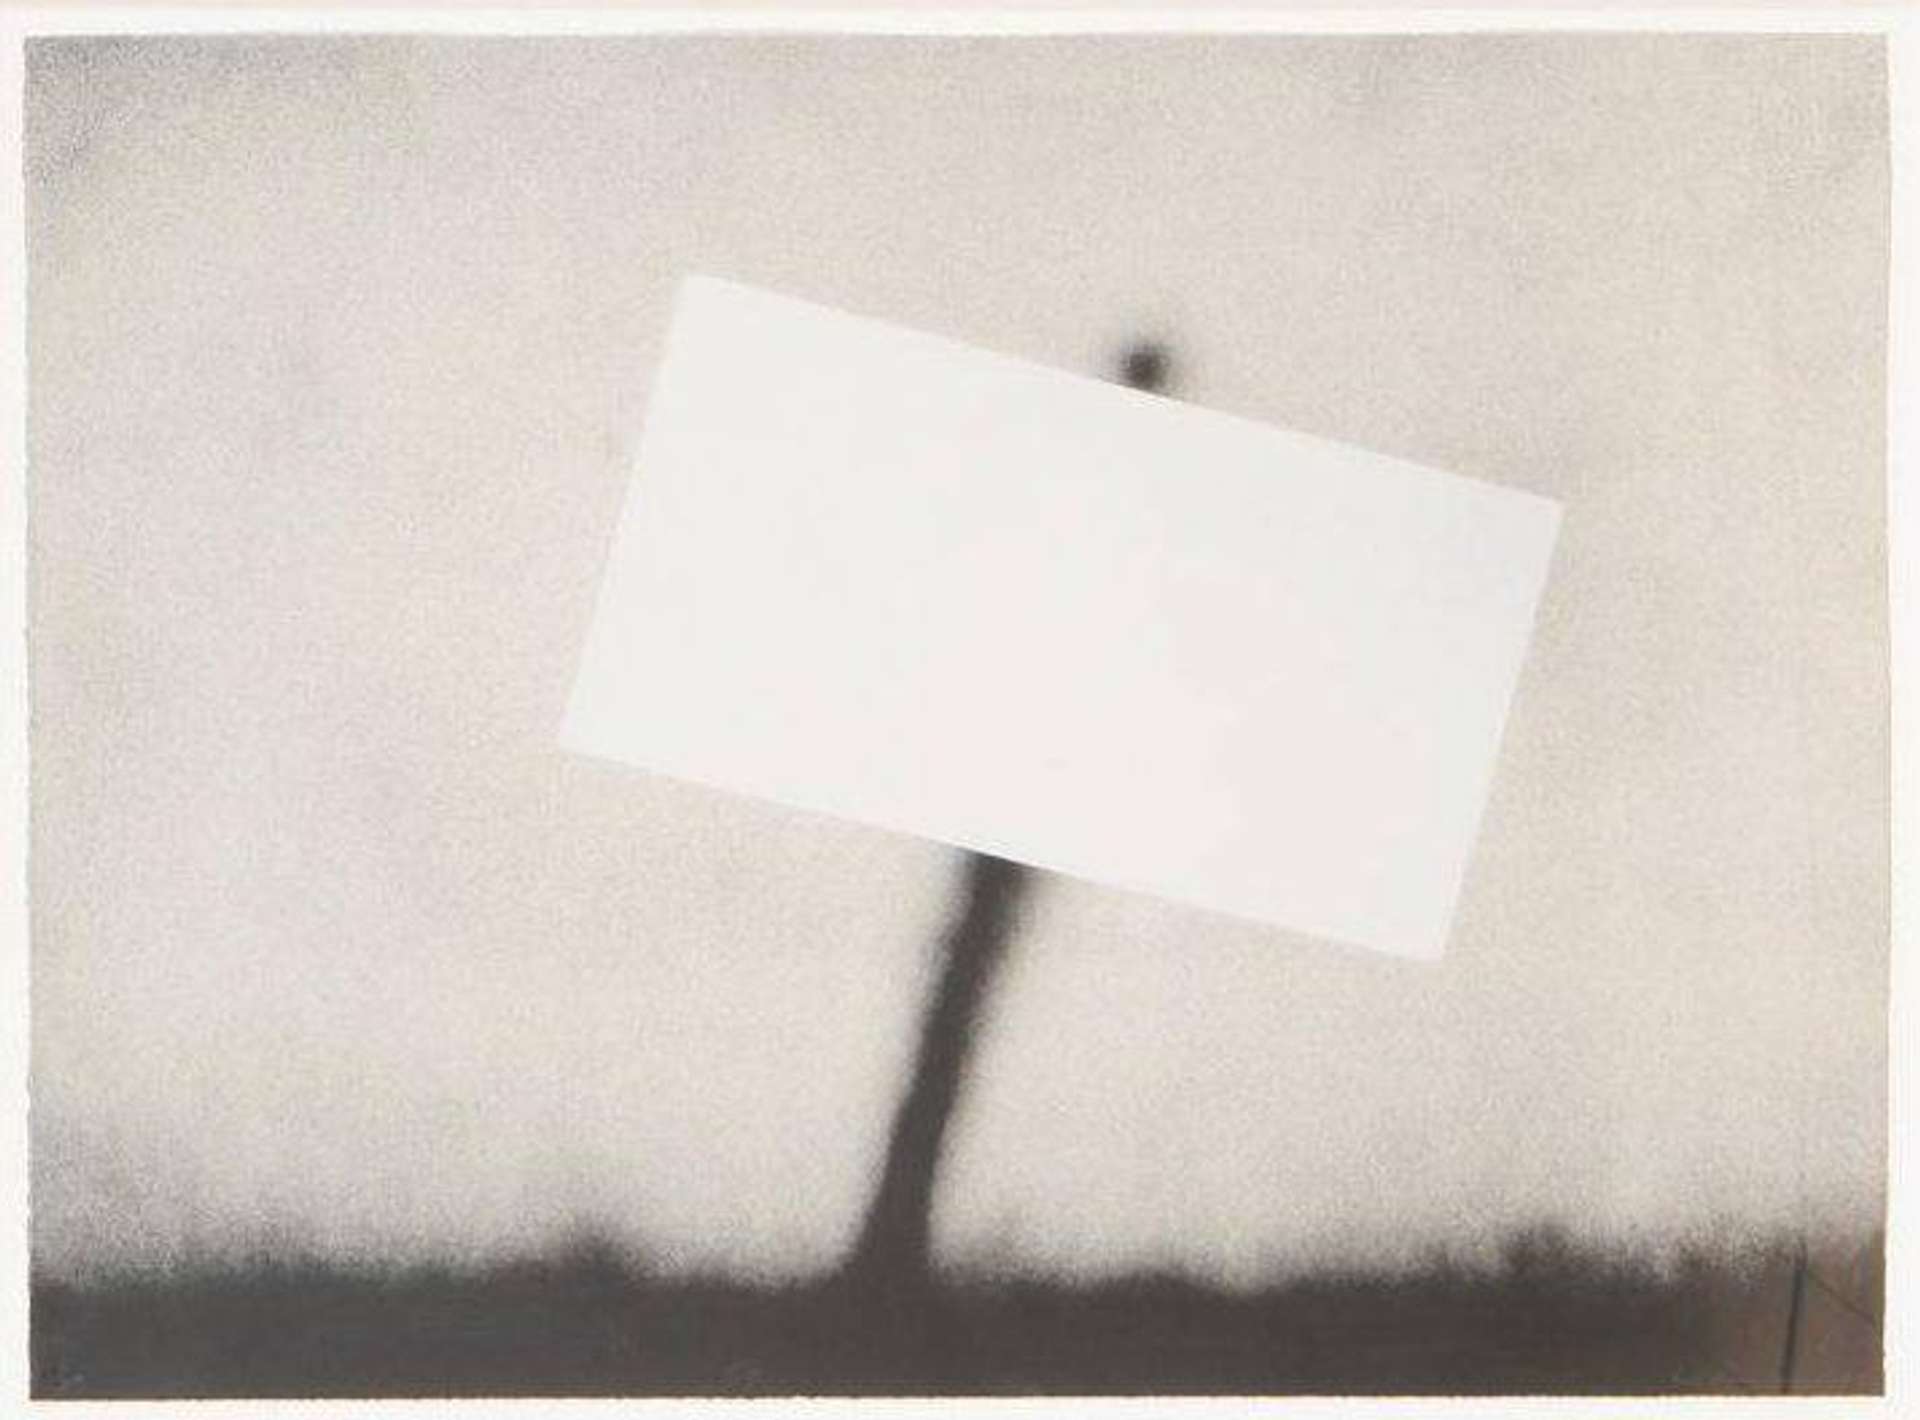 Ed Ruscha: Untitled Blank Sign - Signed Print